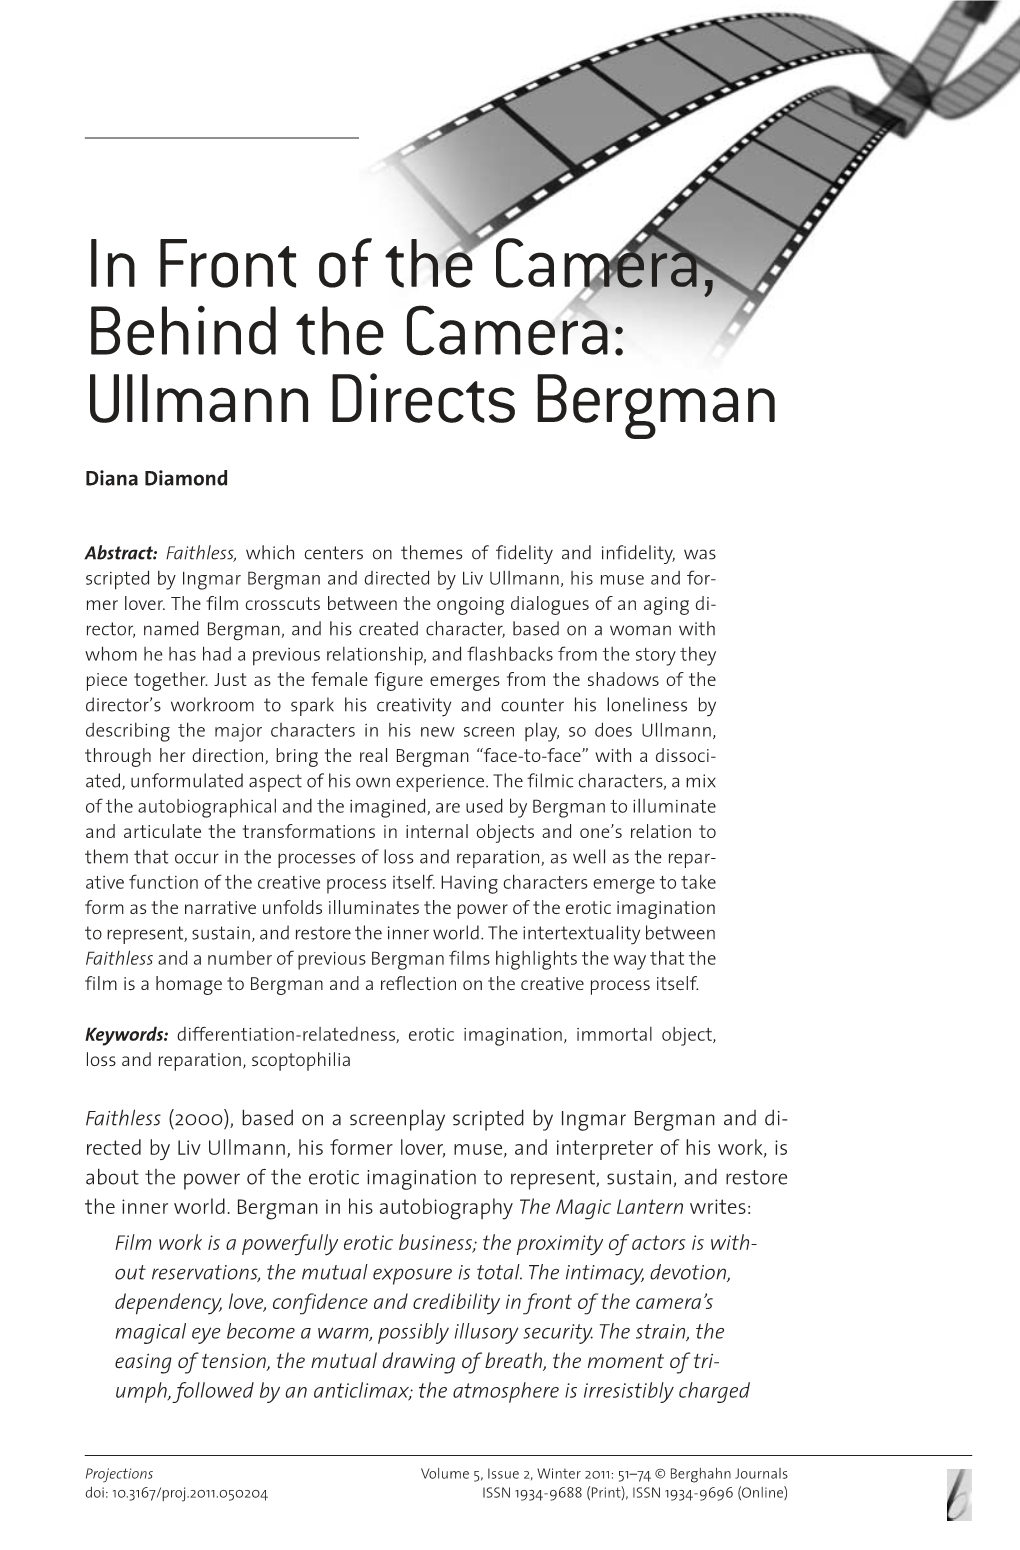 In Front of the Camera, Behind the Camera: Ullmann Directs Bergman